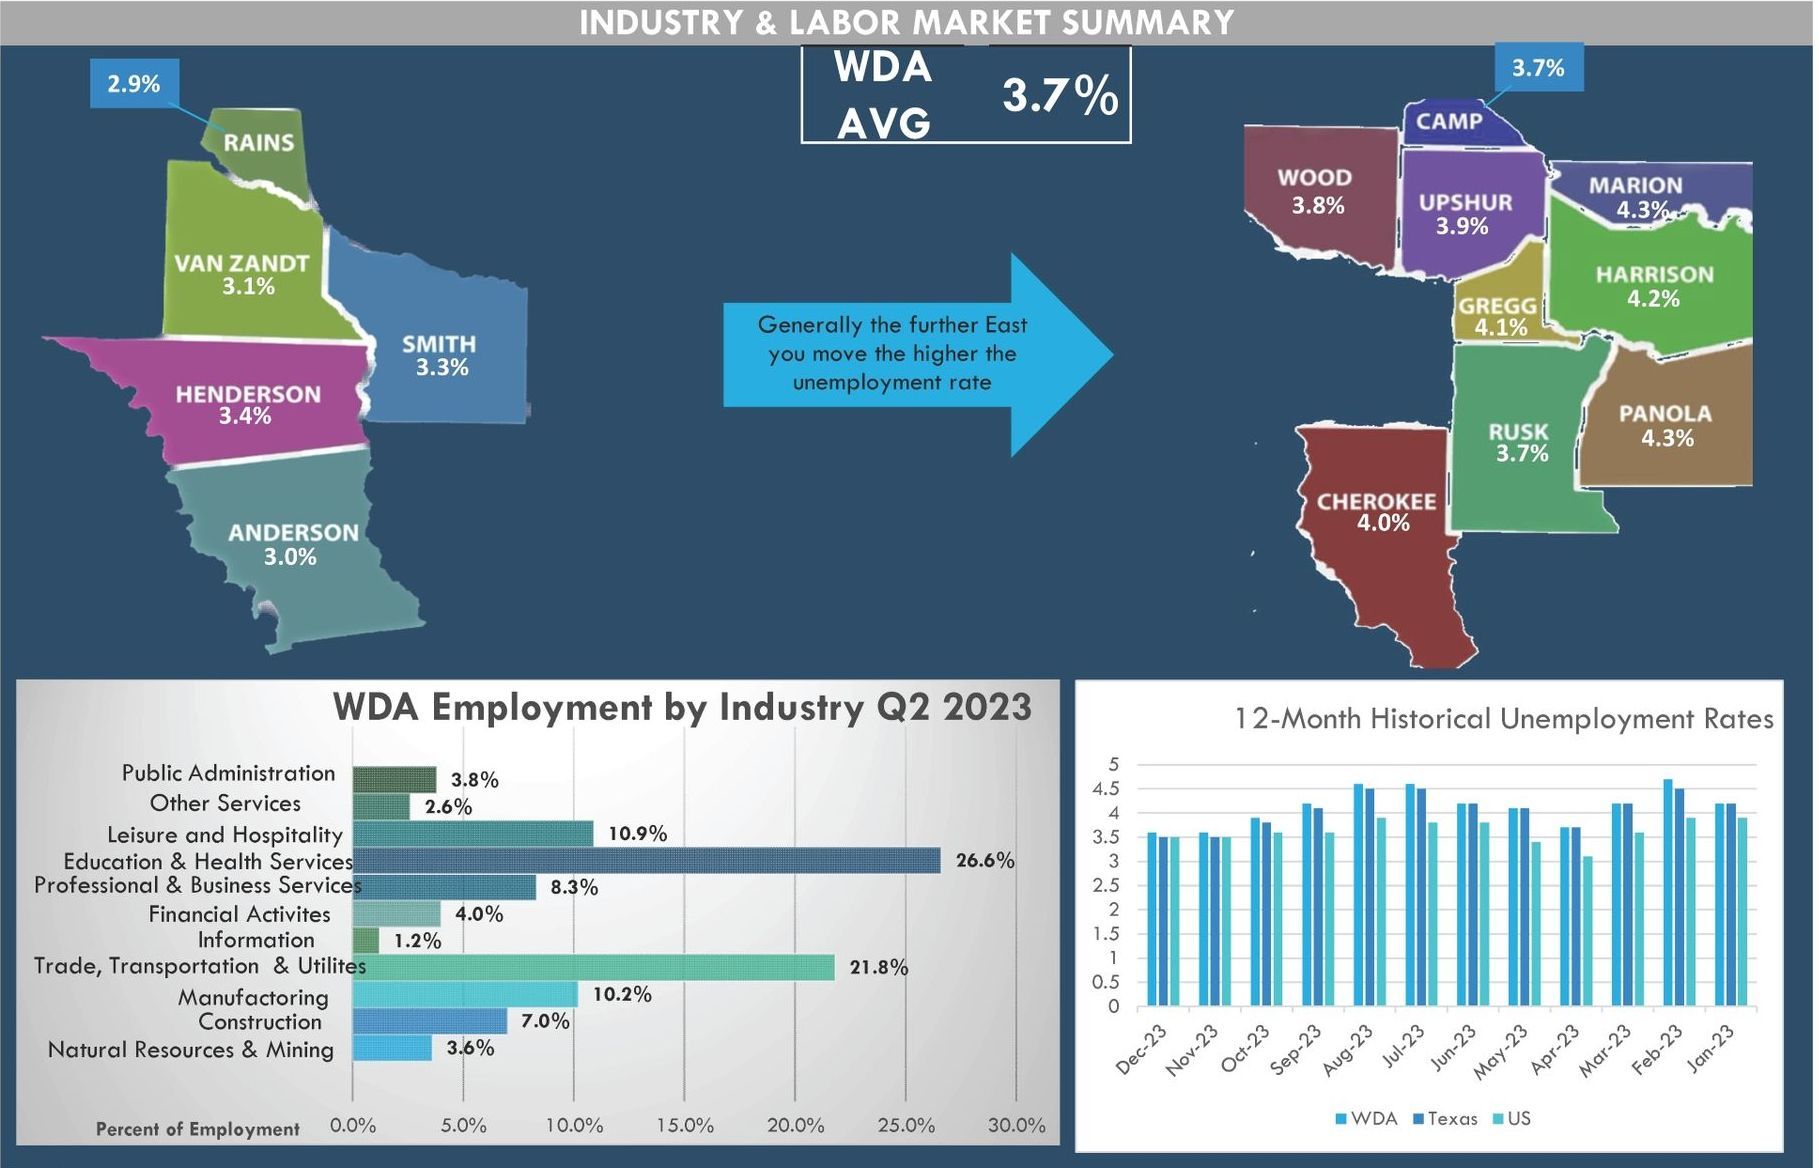 A graphic showing the industry and labor market summary